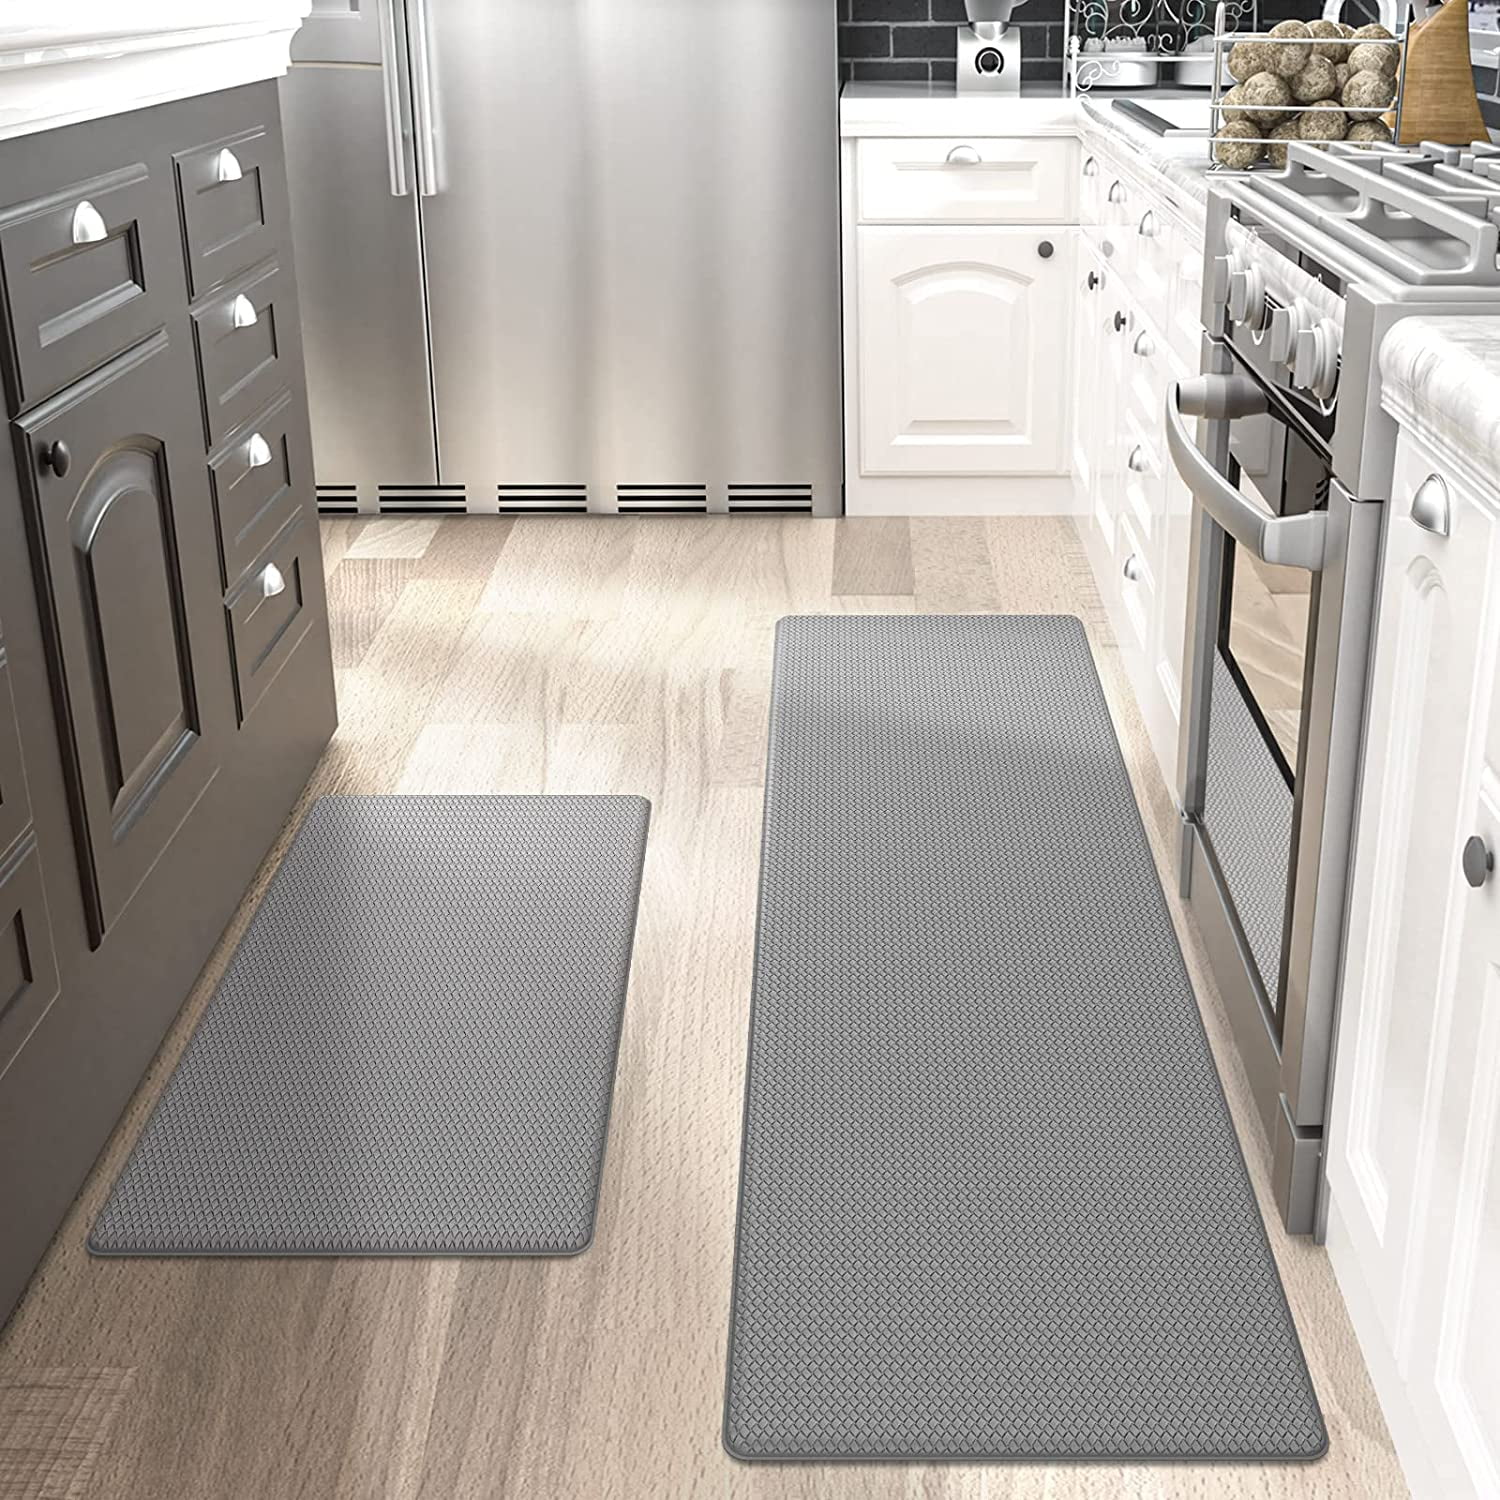 Anti Fatigue Mats for Kitchen Floor, TEMASH Kitchen Rugs and Mats